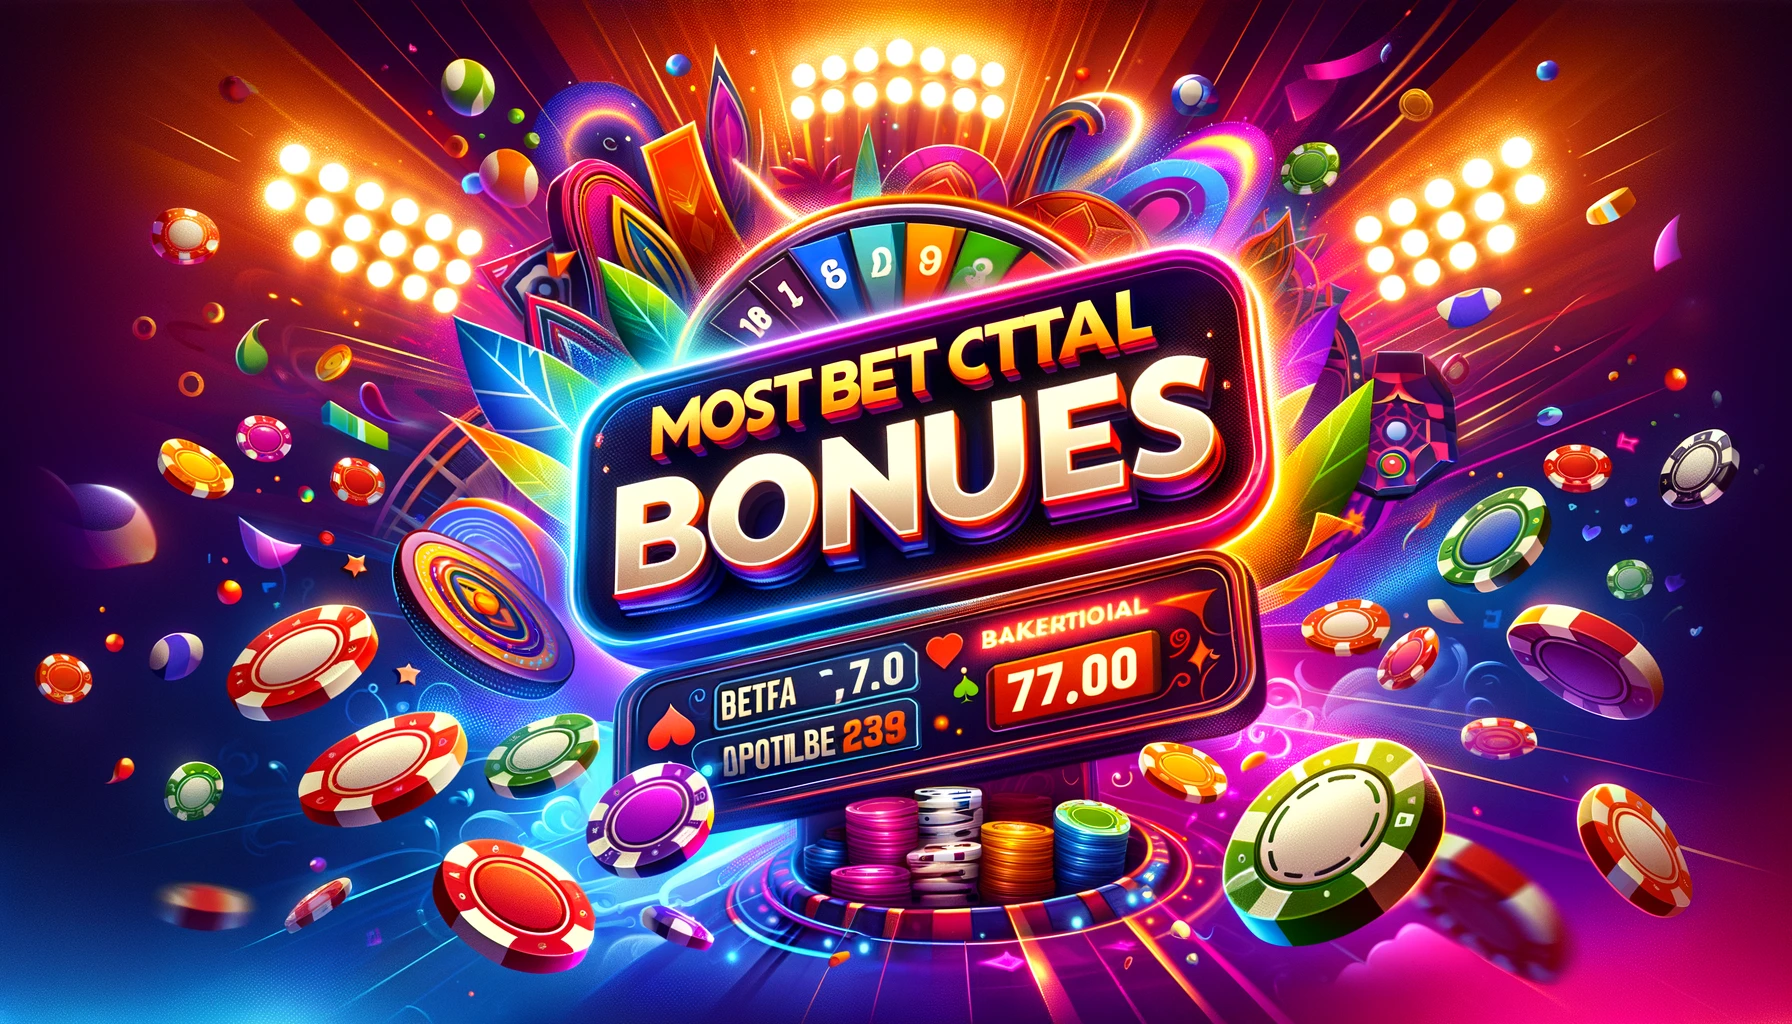 3 Mistakes In Mostbet Bonuses That Make You Look Dumb